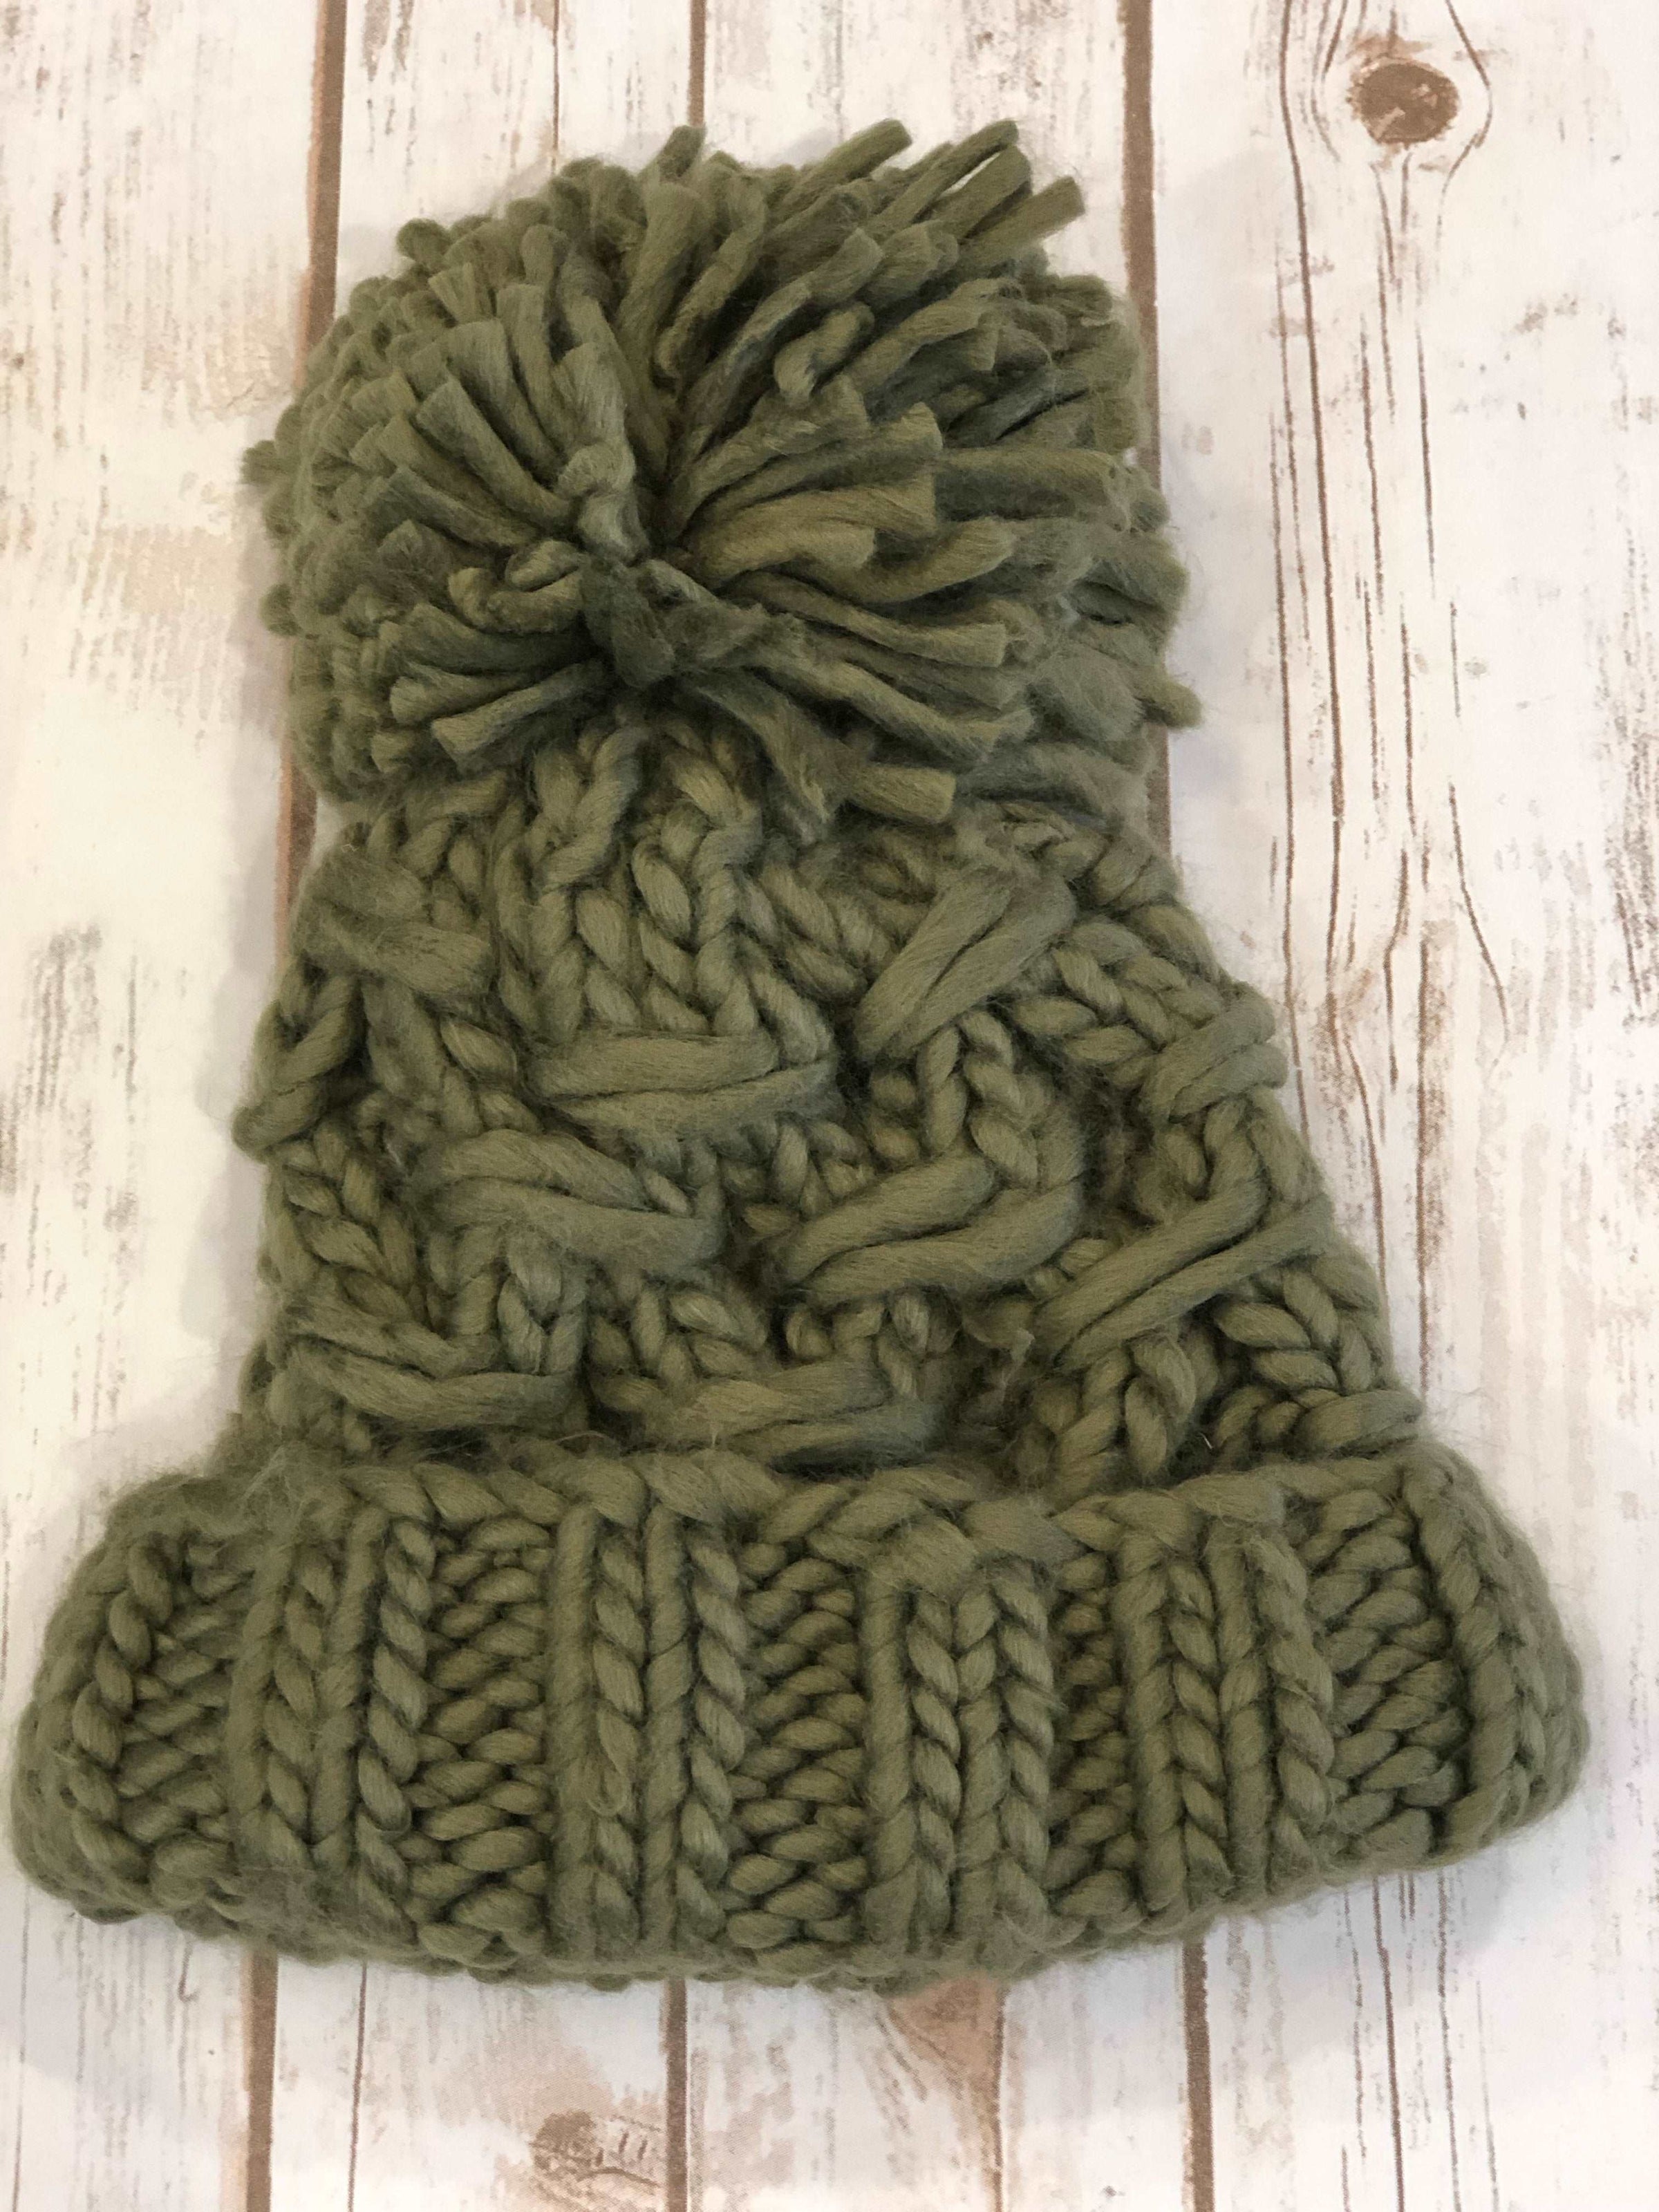 Cargo Knit Cozy Hat - The Modern Gypsy Collection